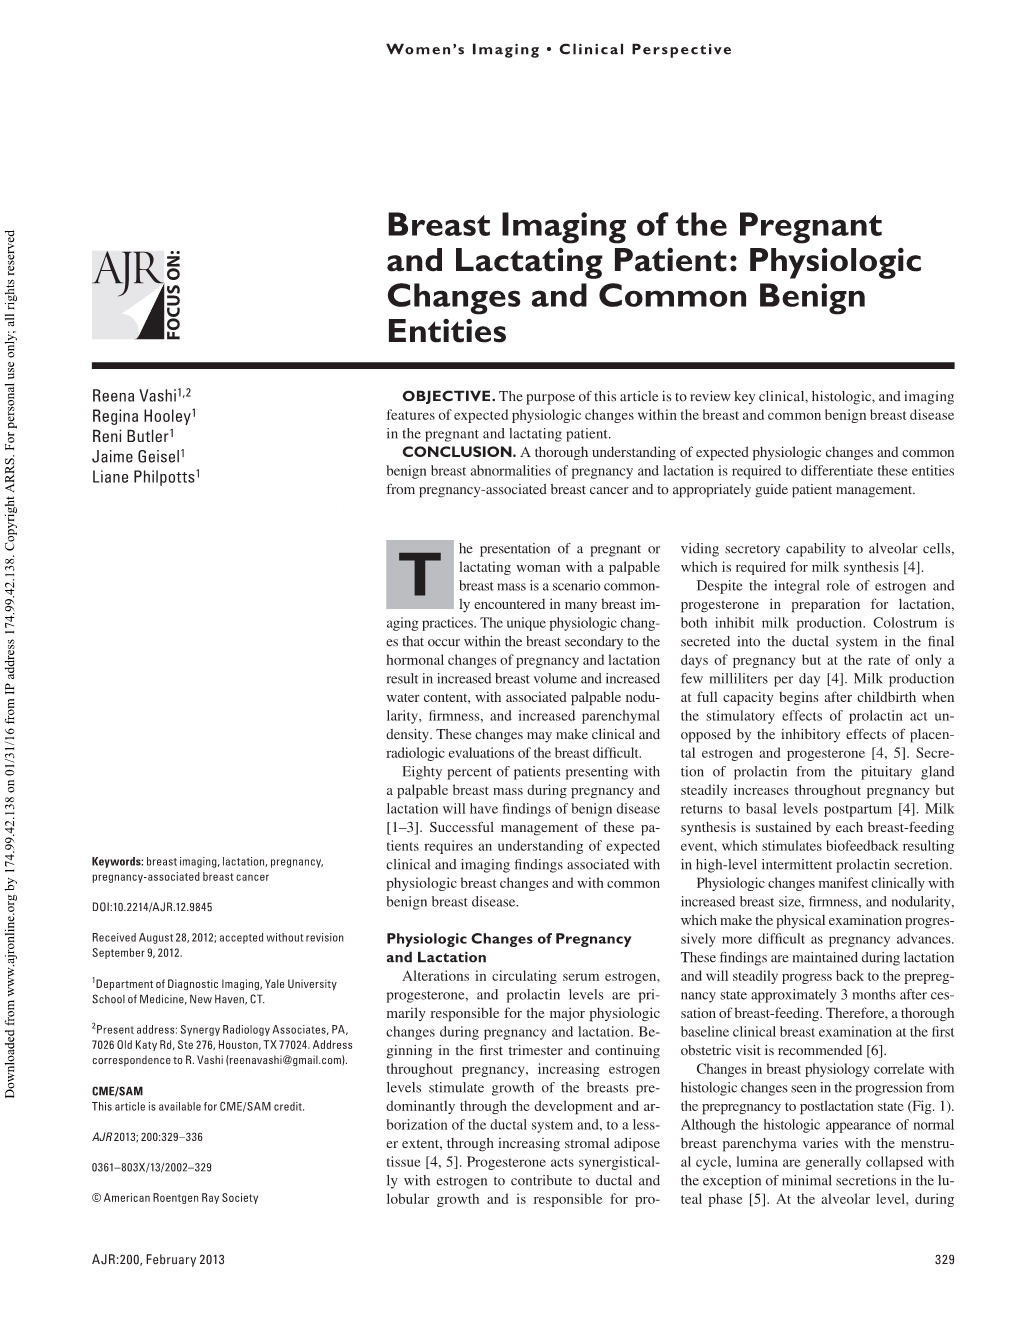 Breast Imaging of the Pregnant and Lactating Patient